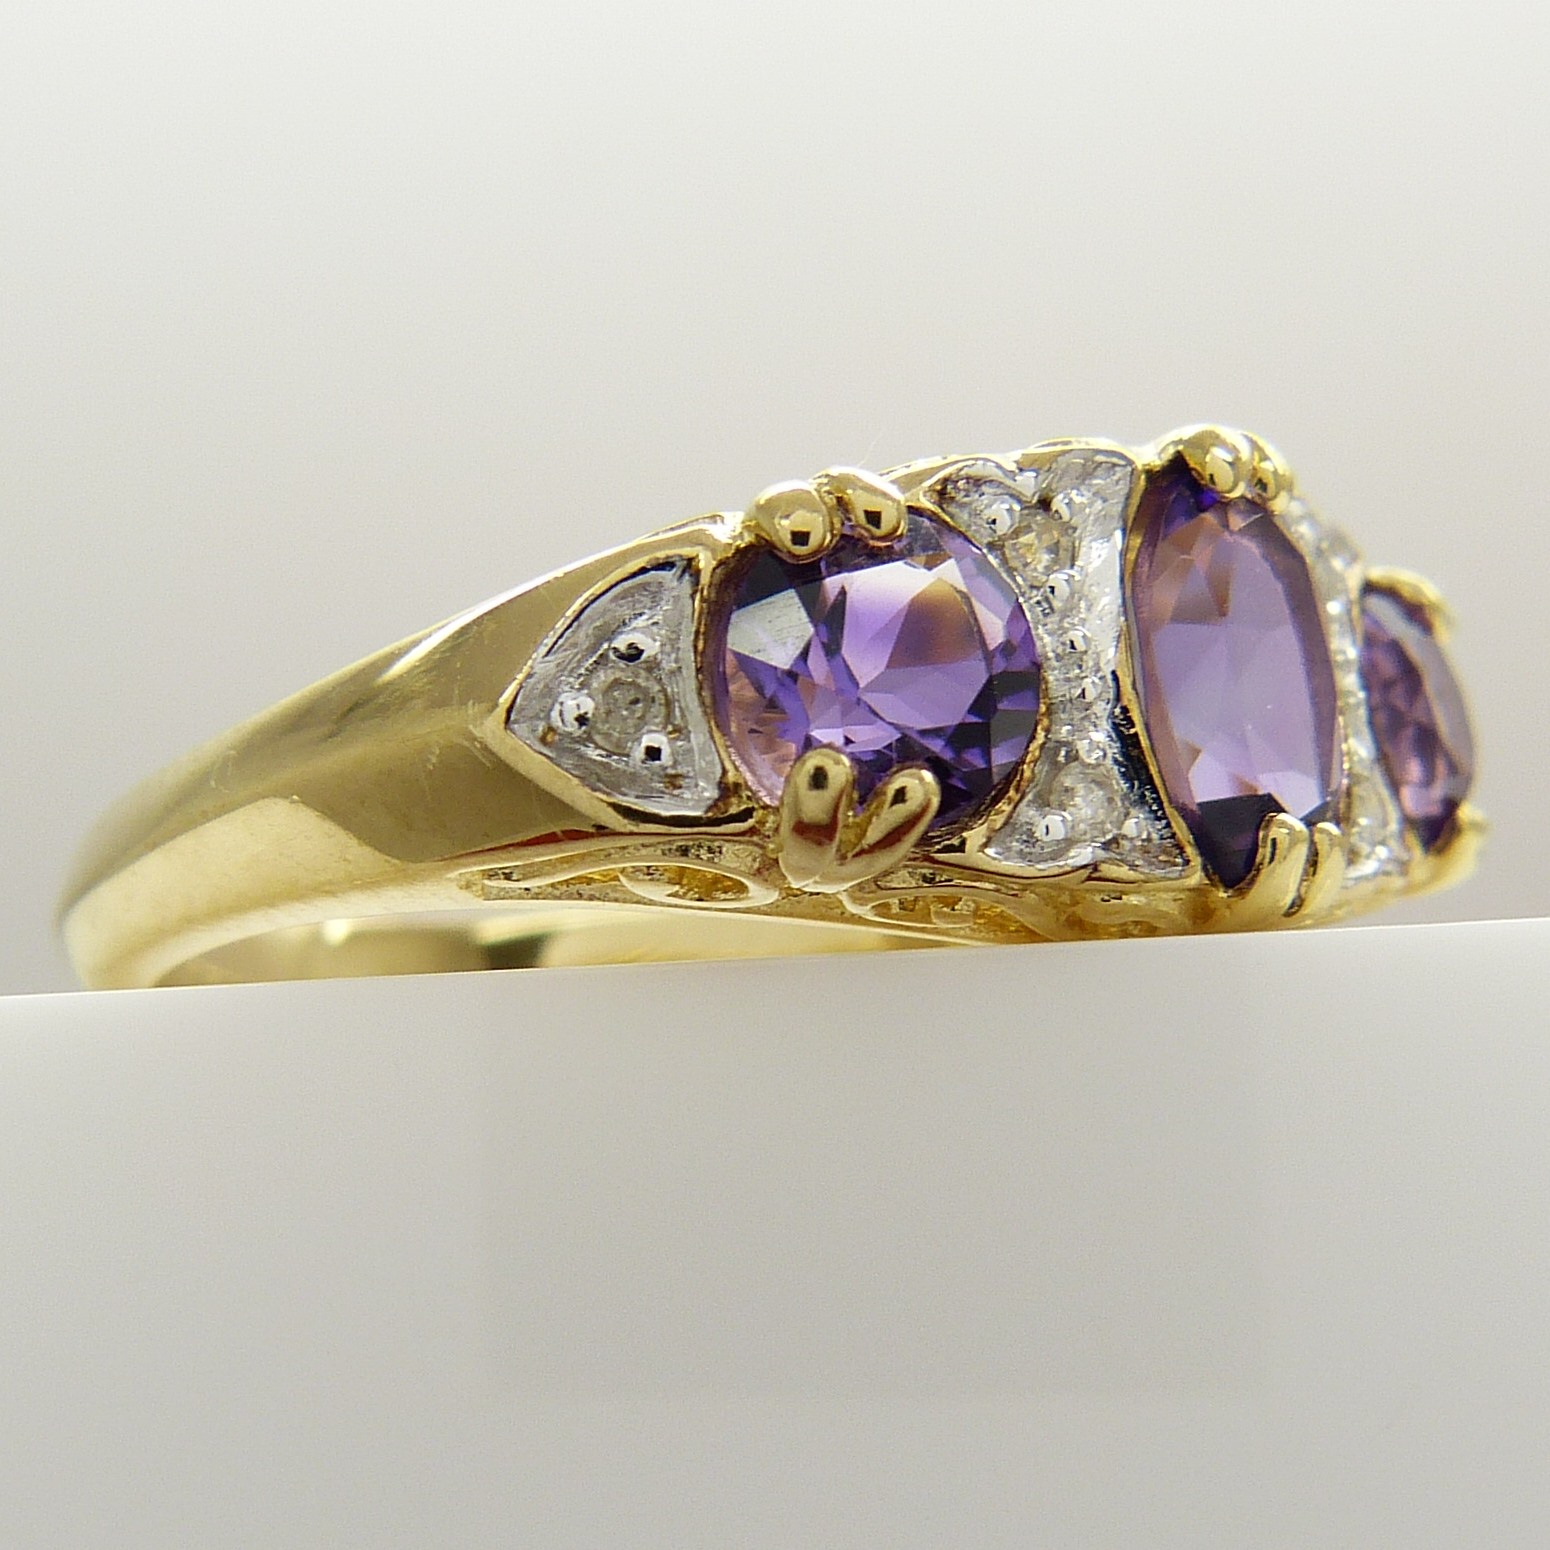 A Victorian-style dress ring set with amethysts and diamonds in 9ct yellow gold - Image 4 of 8